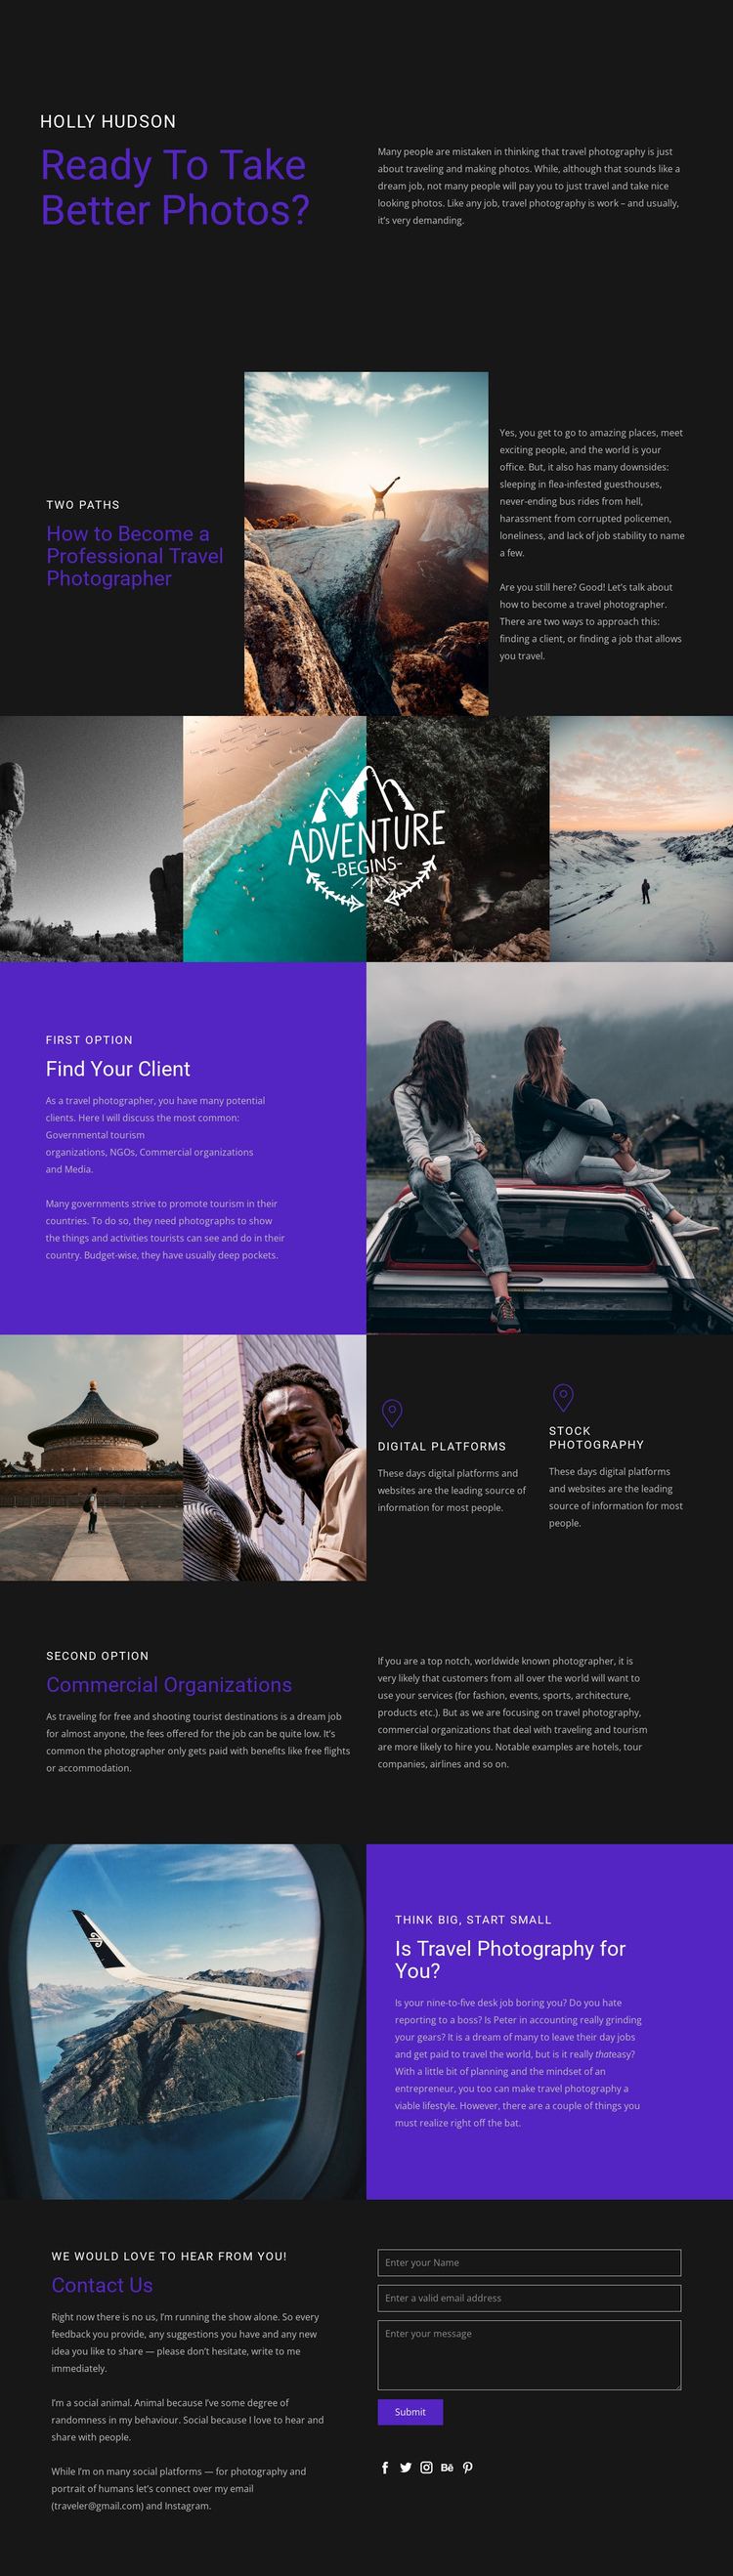 Travel and photography Website Builder Software